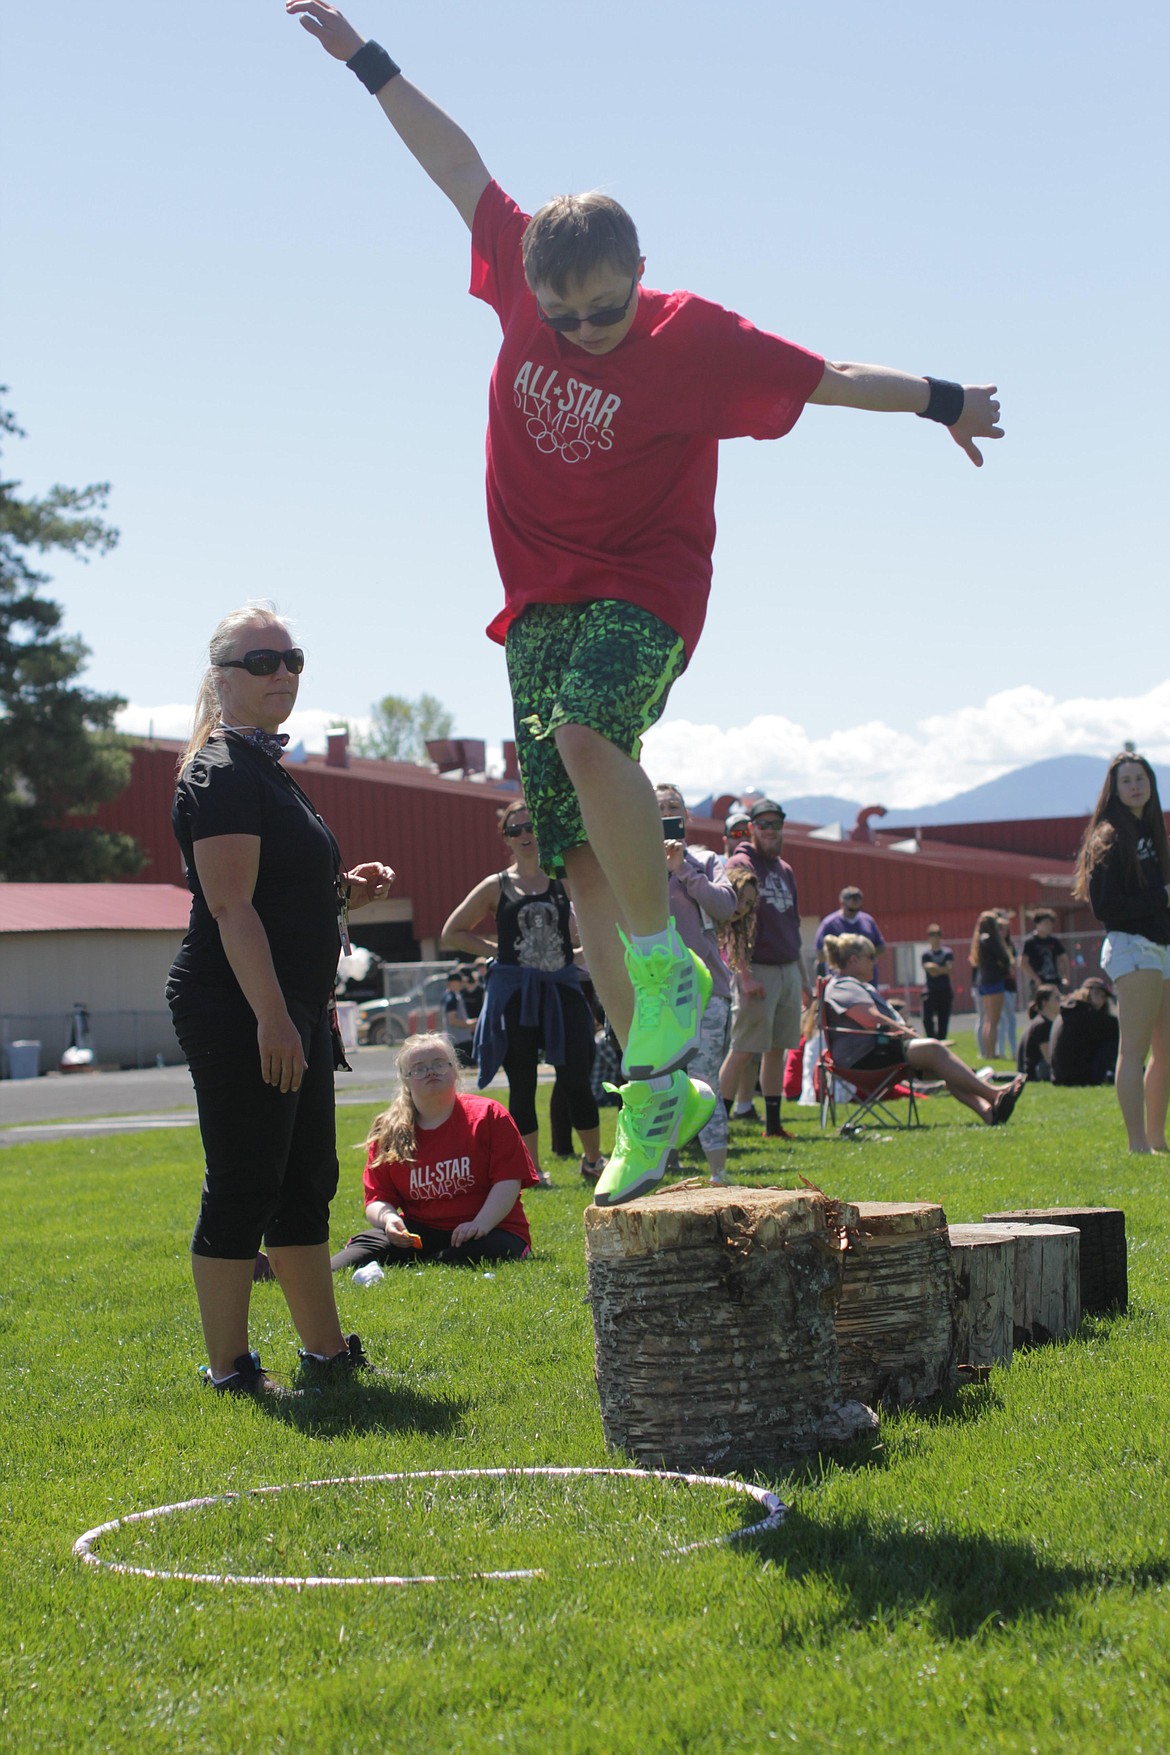 Campbell Wyman jumps off a log at the All Star Olympics obstacle course.